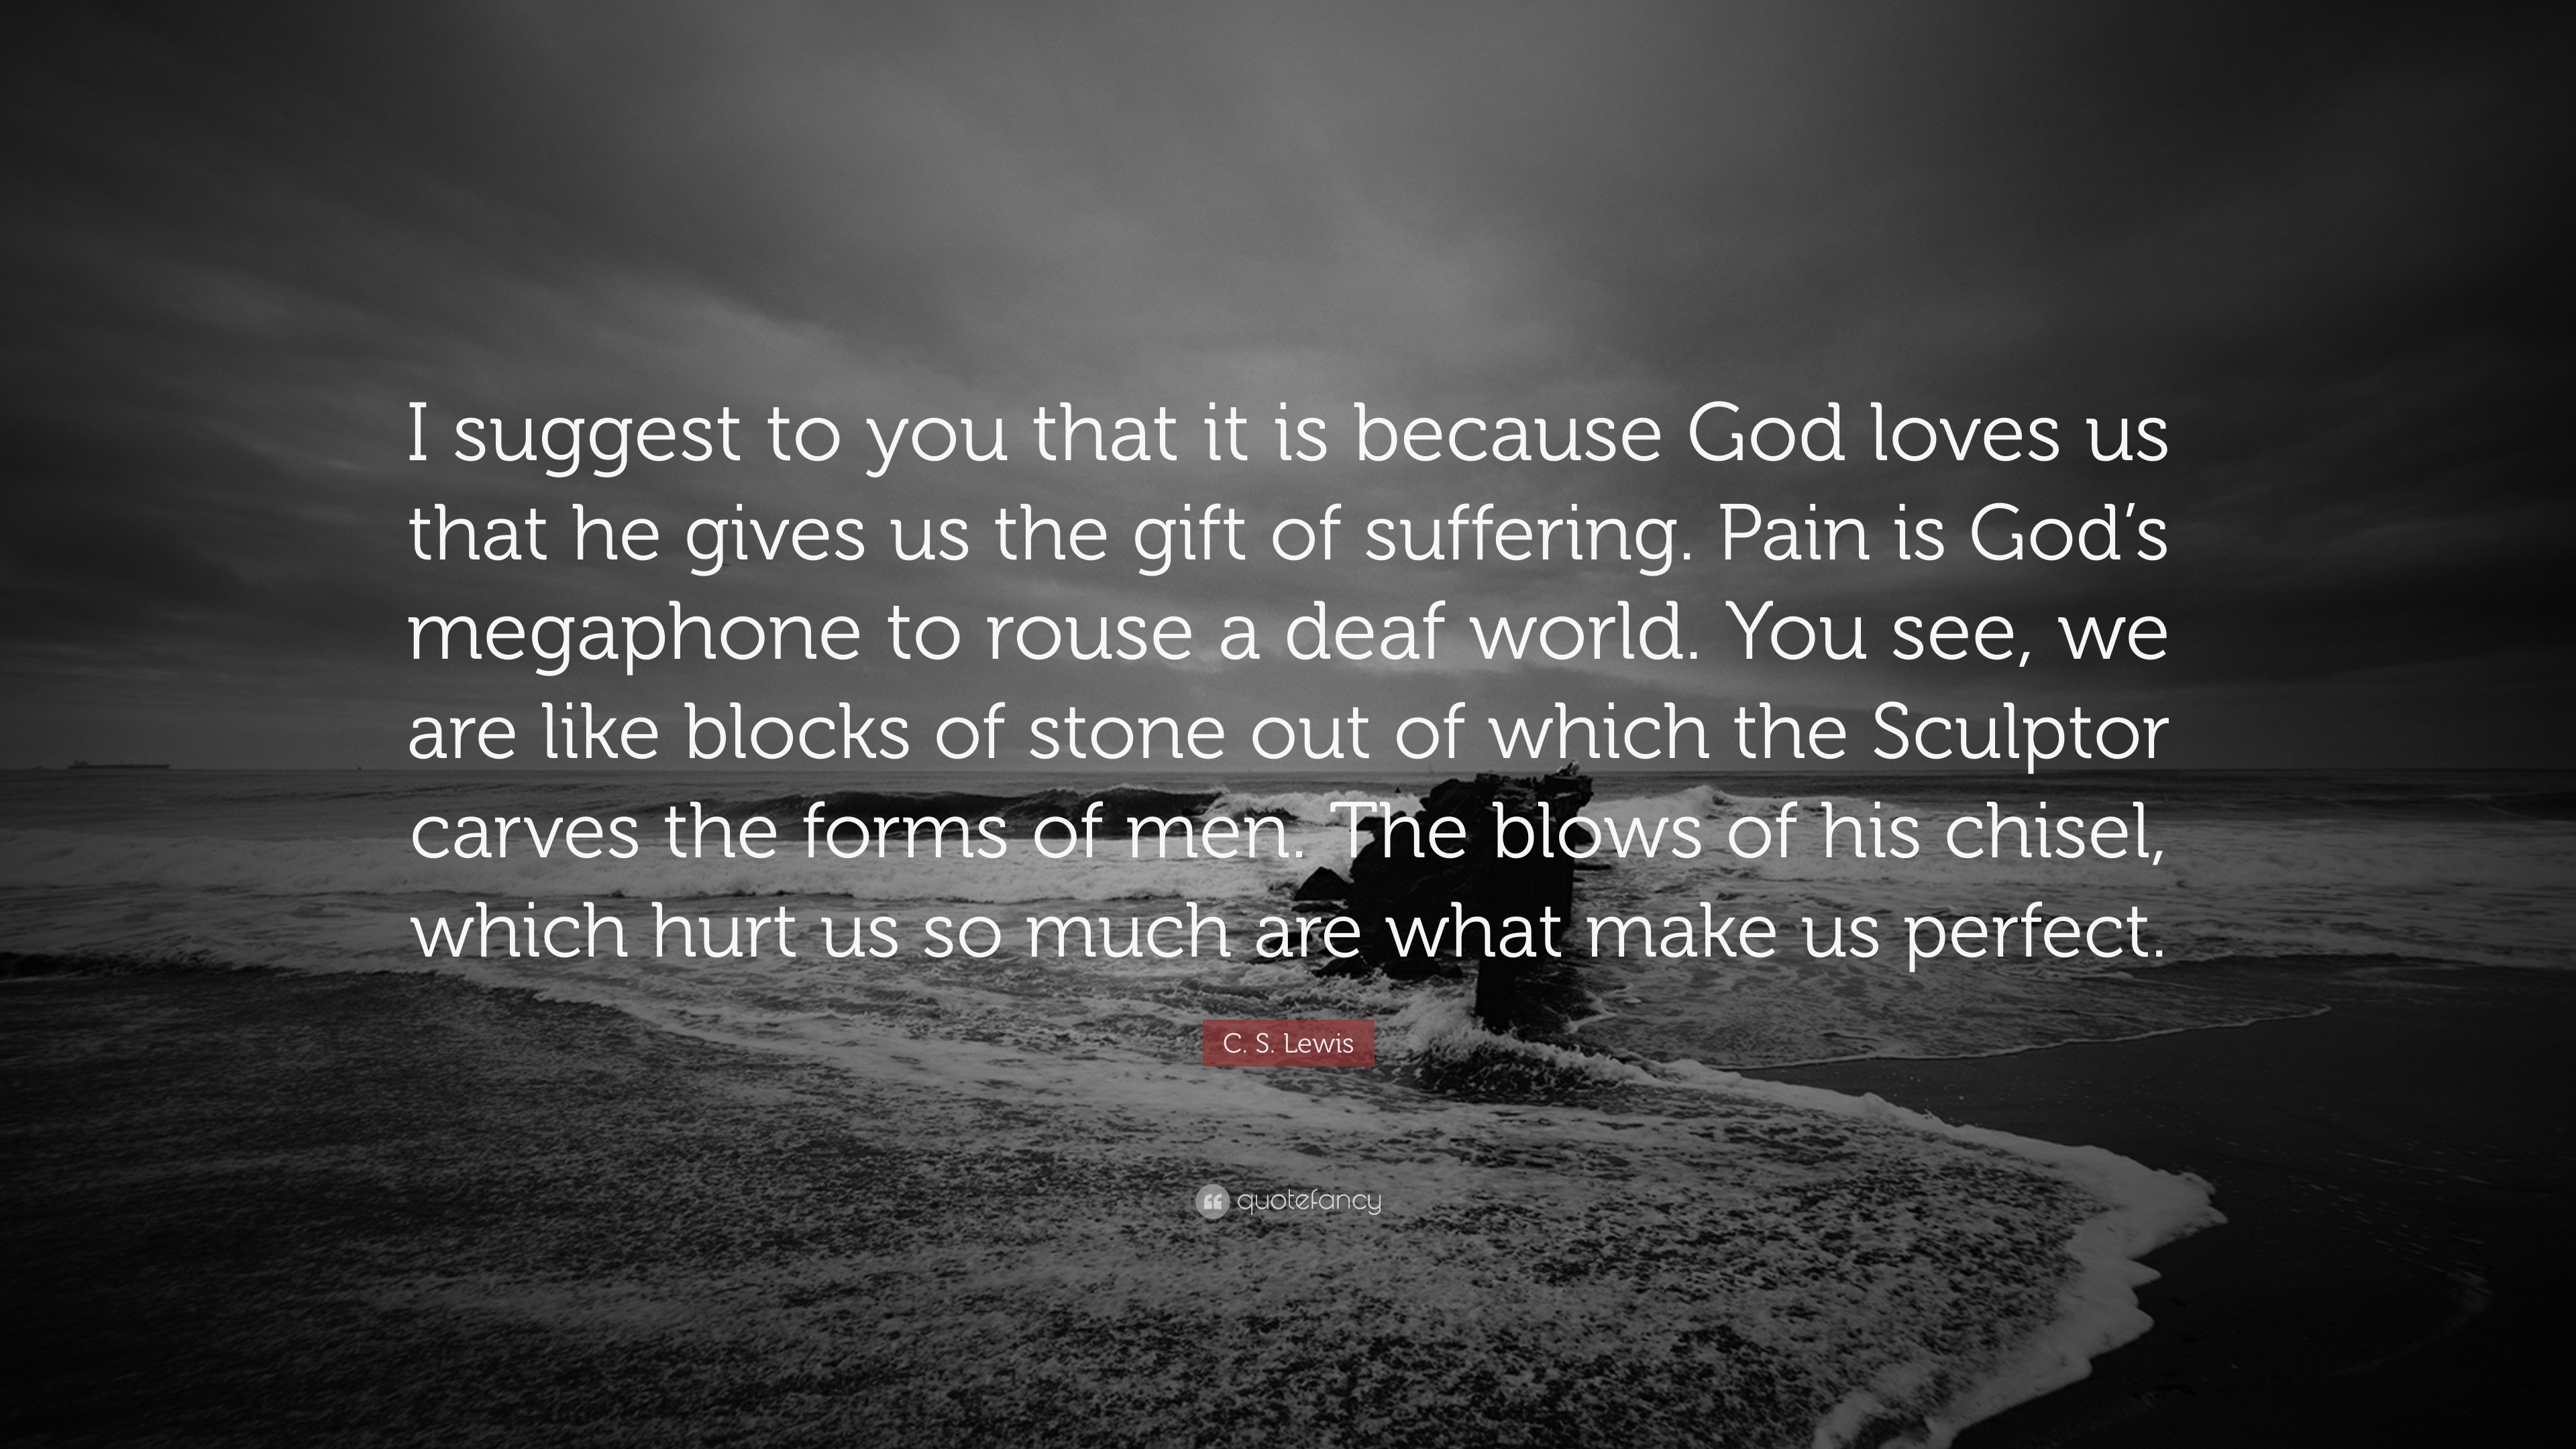 C. S. Lewis Quote: “I suggest to you that it is because God loves us